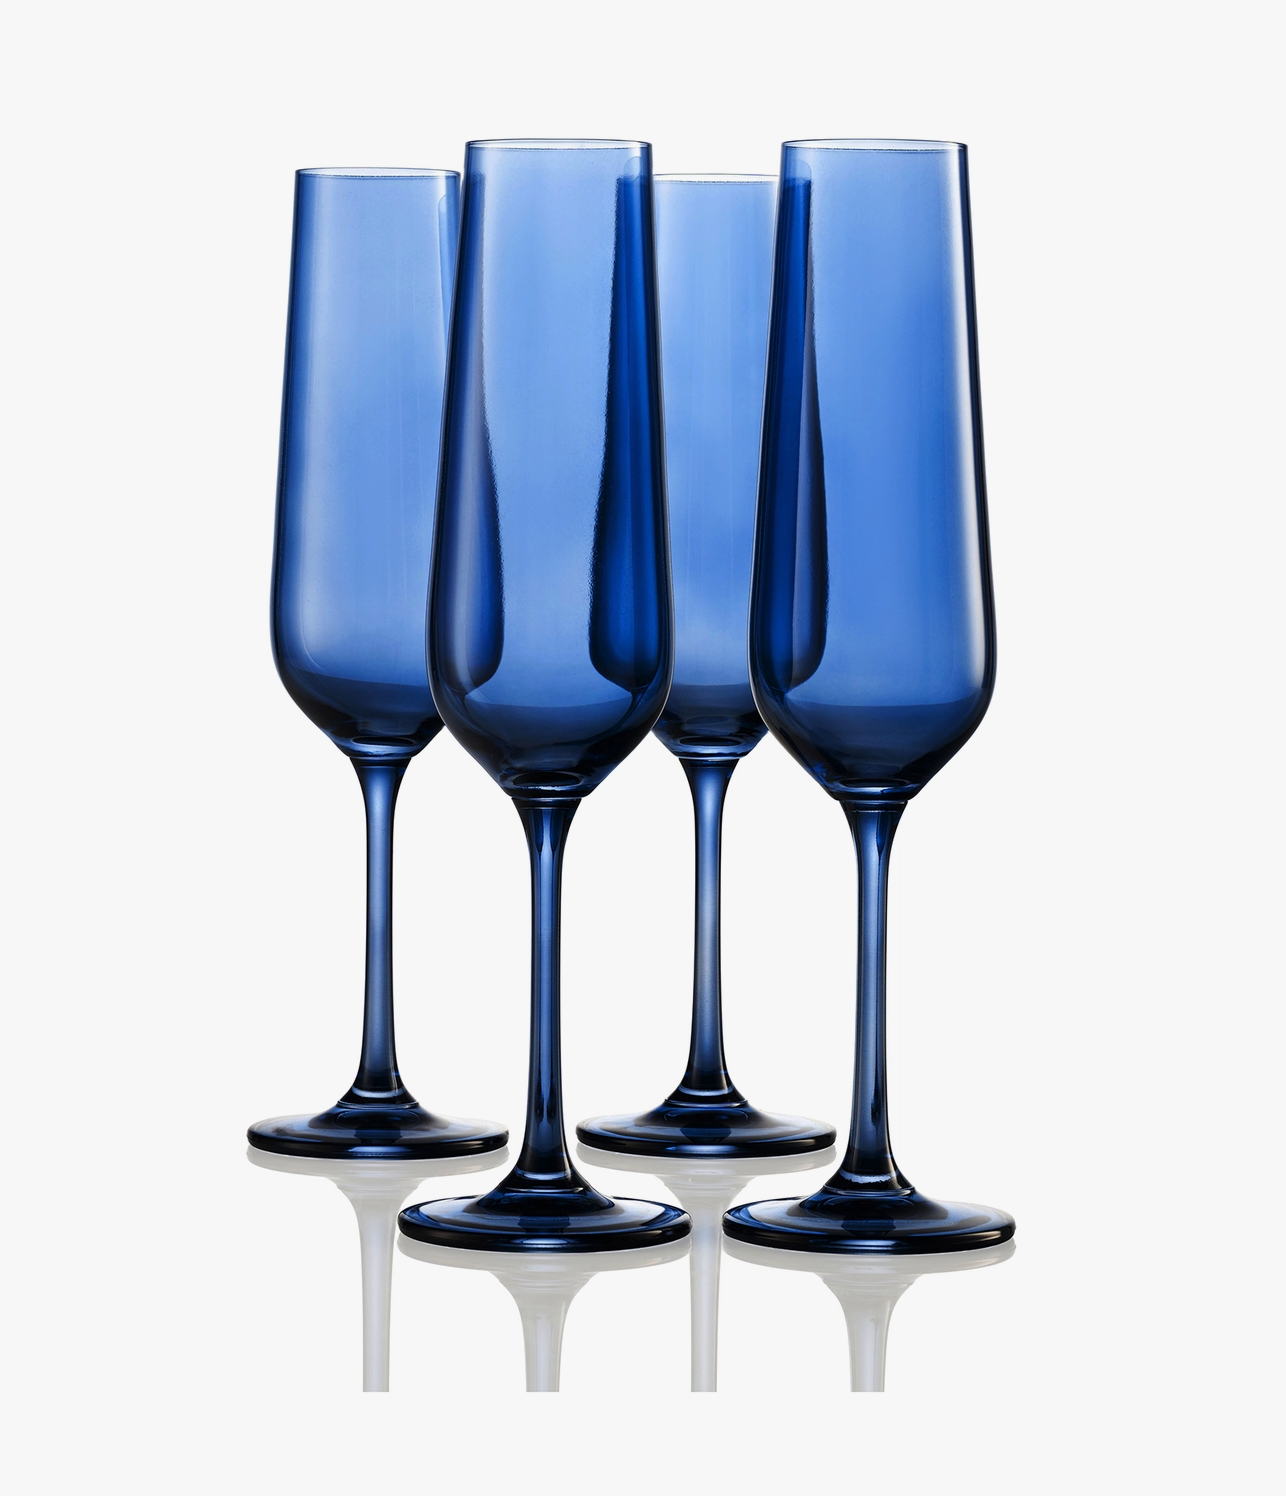 Jewel Tone Colored Champagne Flutes, Set of 4